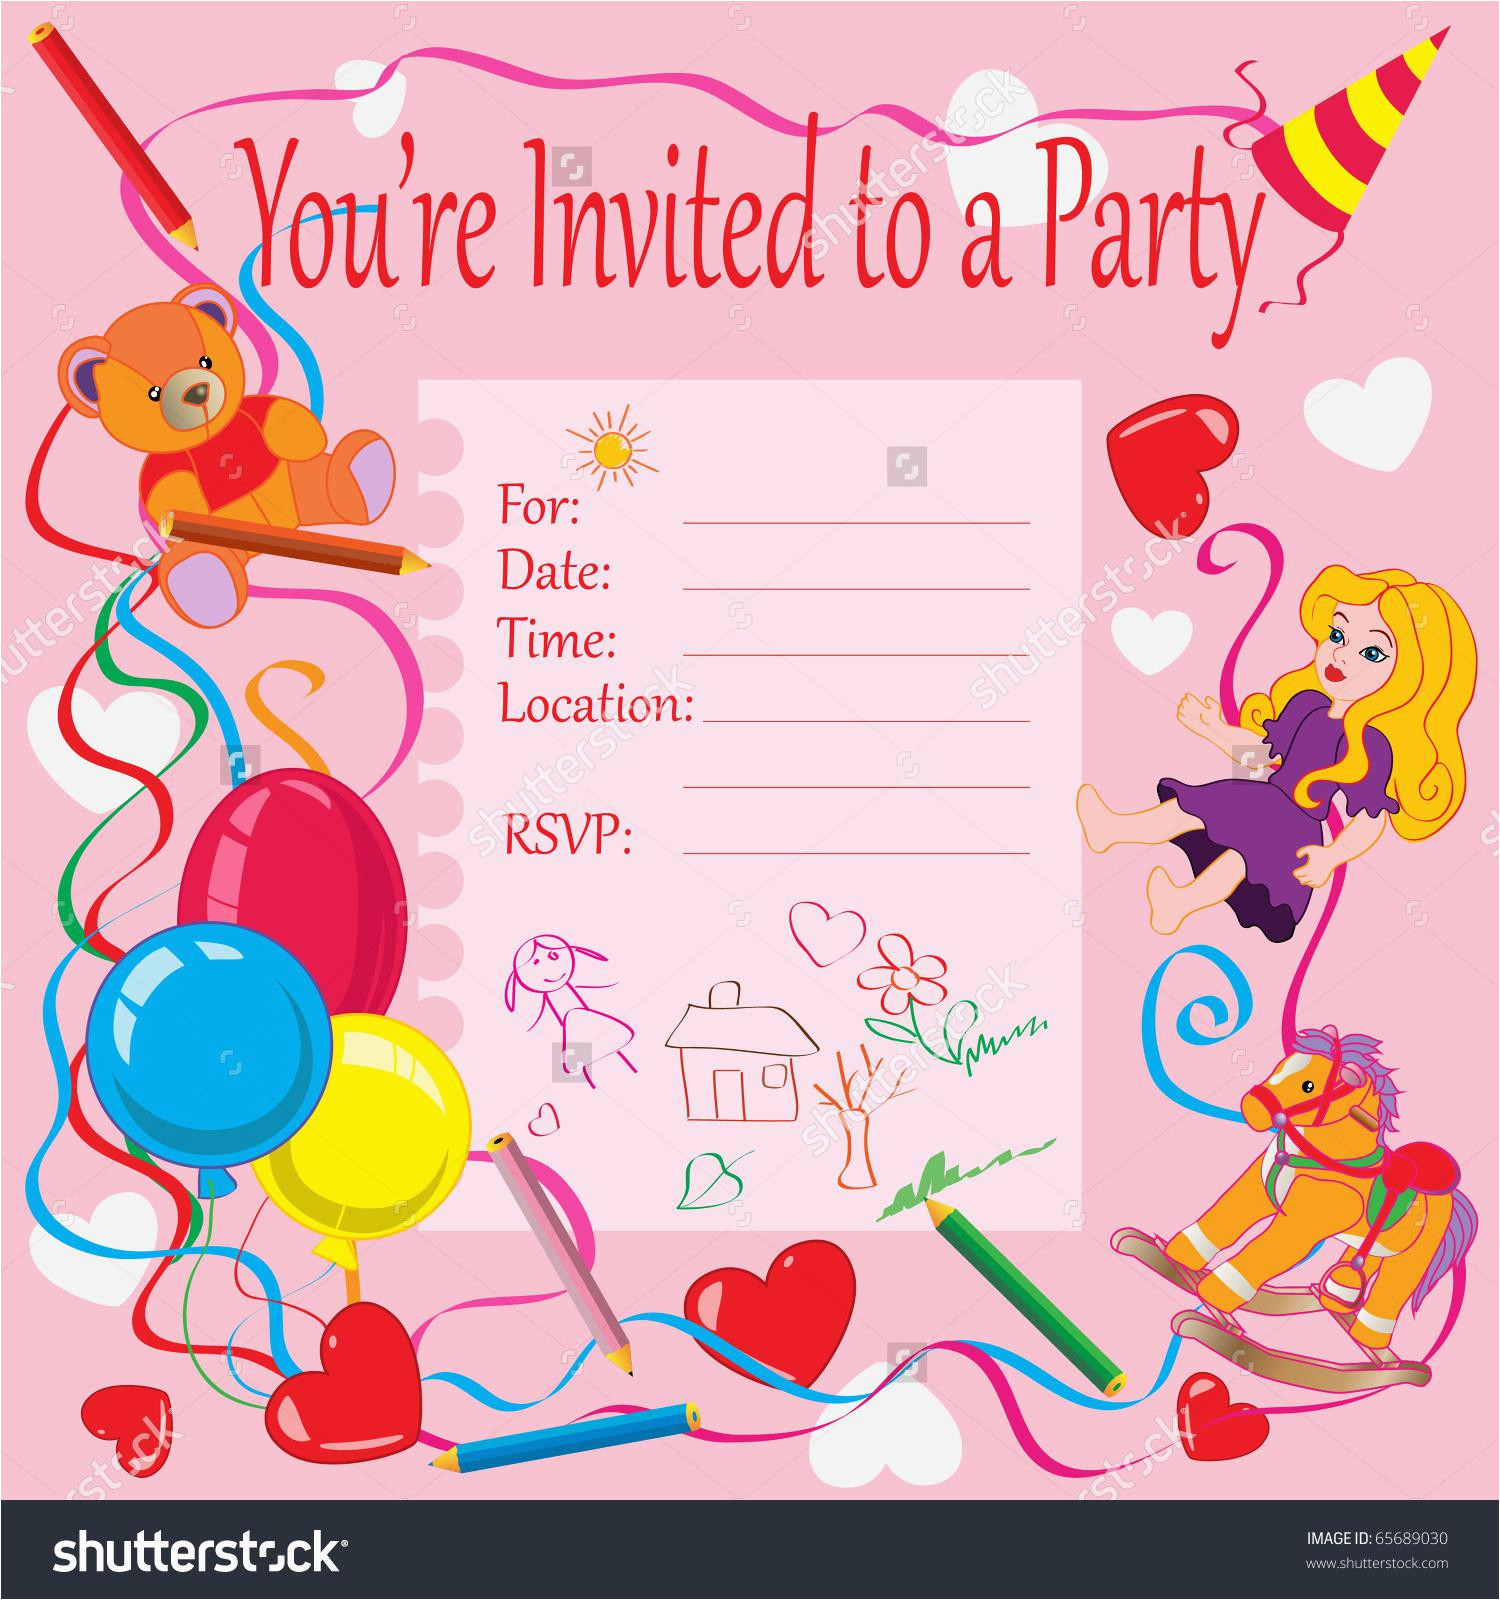 Make Your Own Birthday Invitations
 How to Make line Birthday Invitation Card